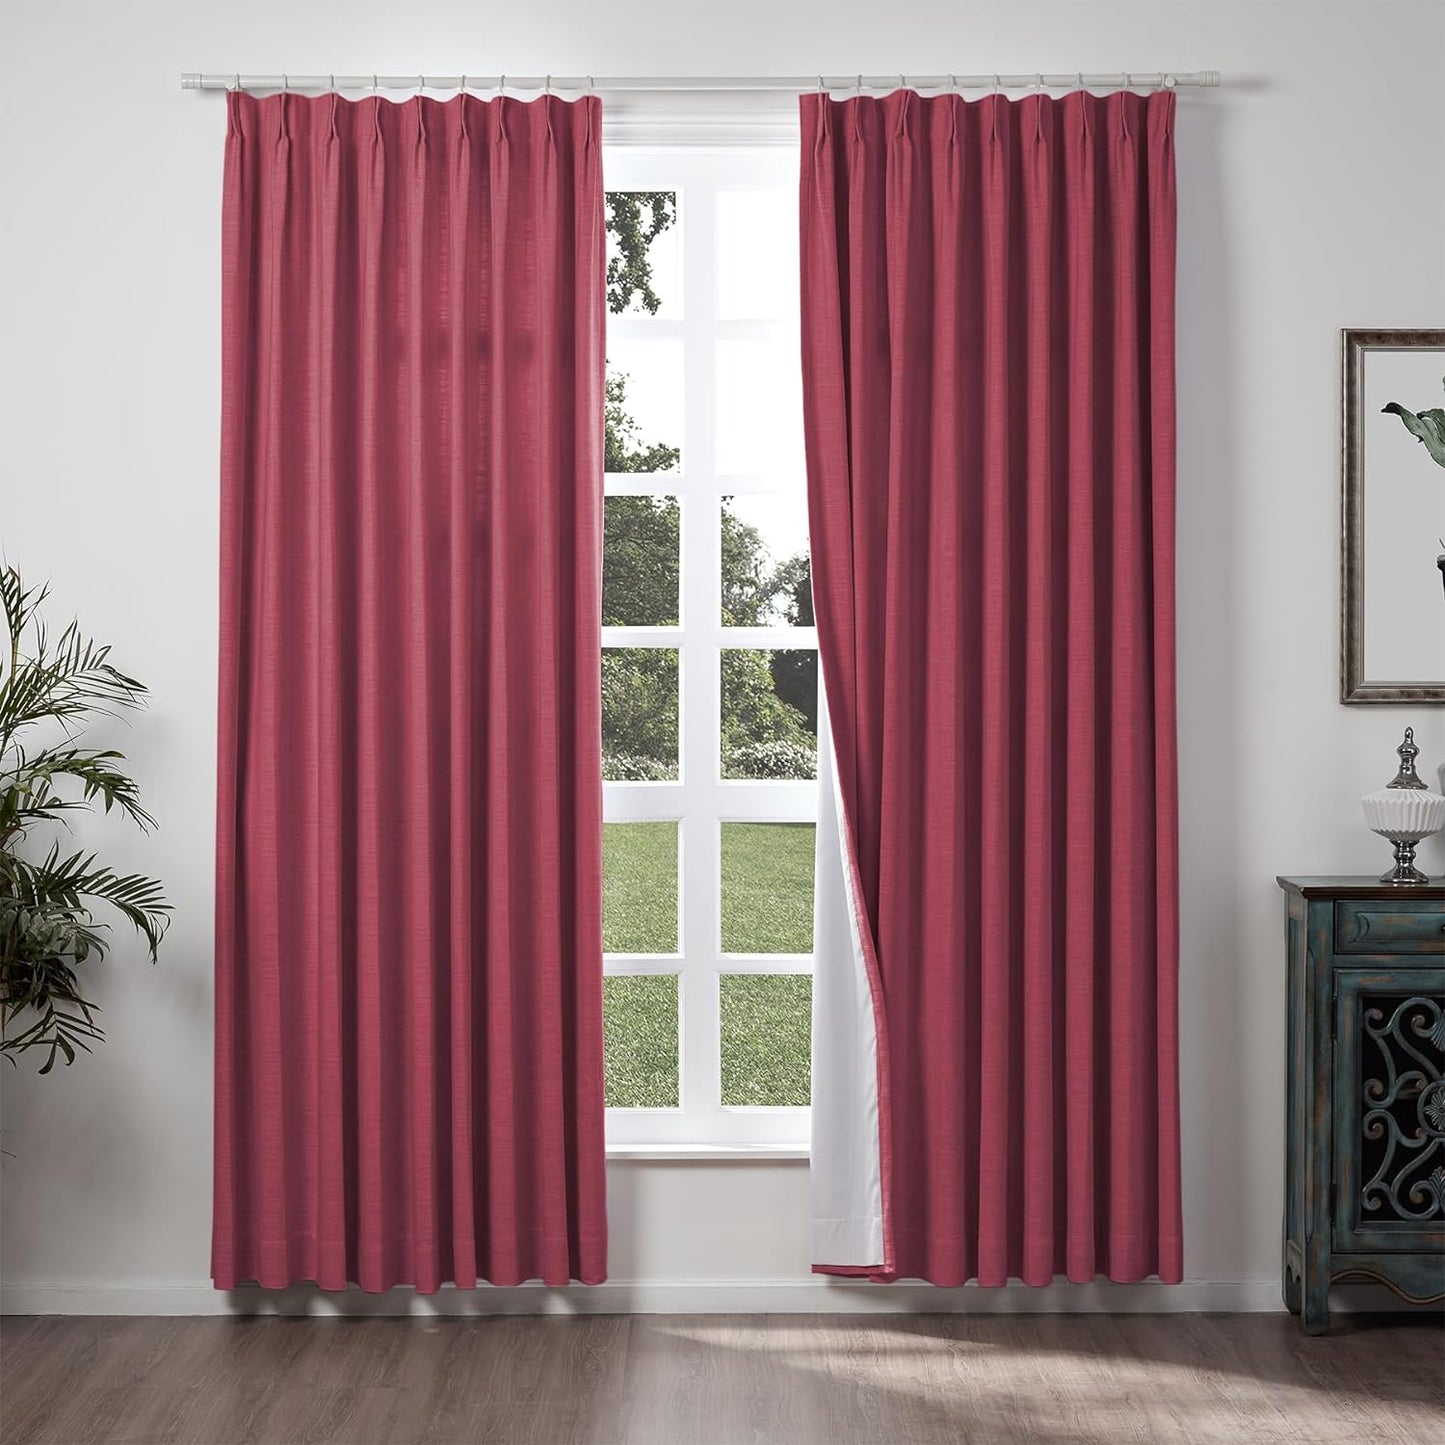 Chadmade 50" W X 63" L Polyester Linen Drape with Blackout Lining Pinch Pleat Curtain for Sliding Door Patio Door Living Room Bedroom, (1 Panel) Sand Beige Tallis Collection  ChadMade Red Wine (23) 100Wx102L 